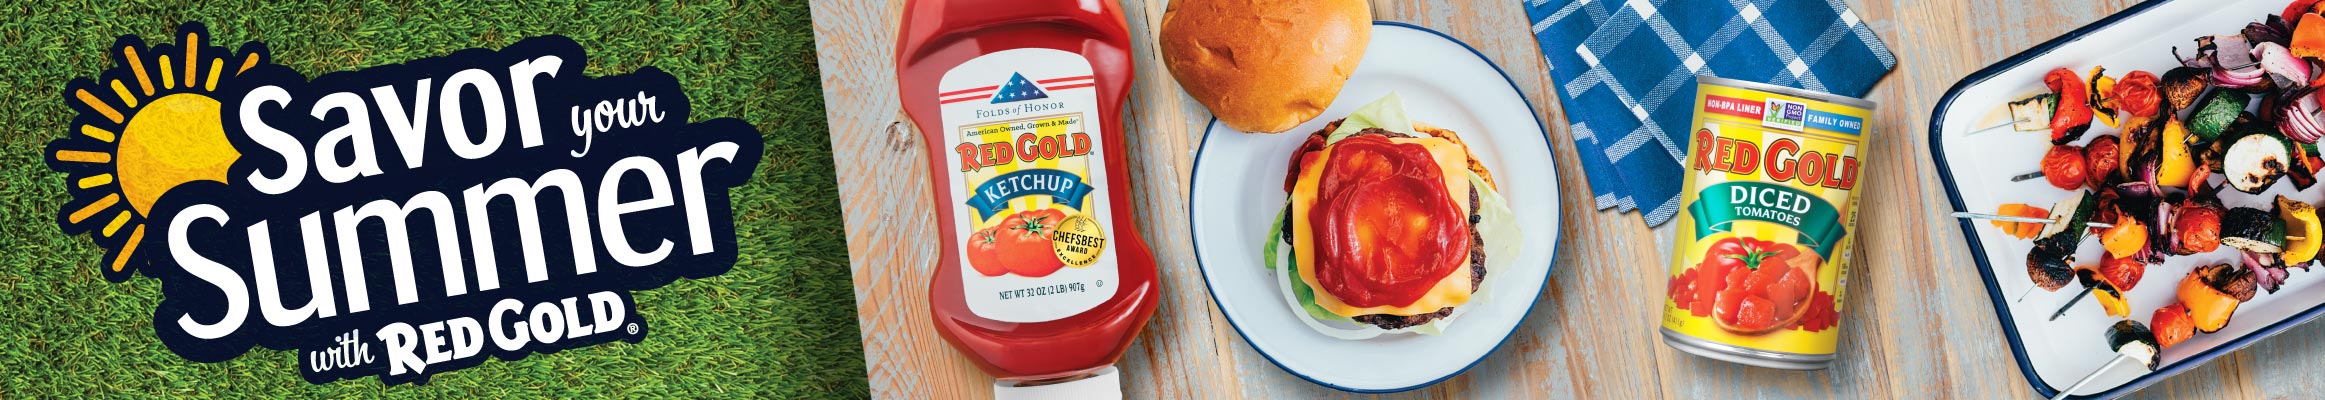 Savor your Summer with Red Gold Canned Tomato Products